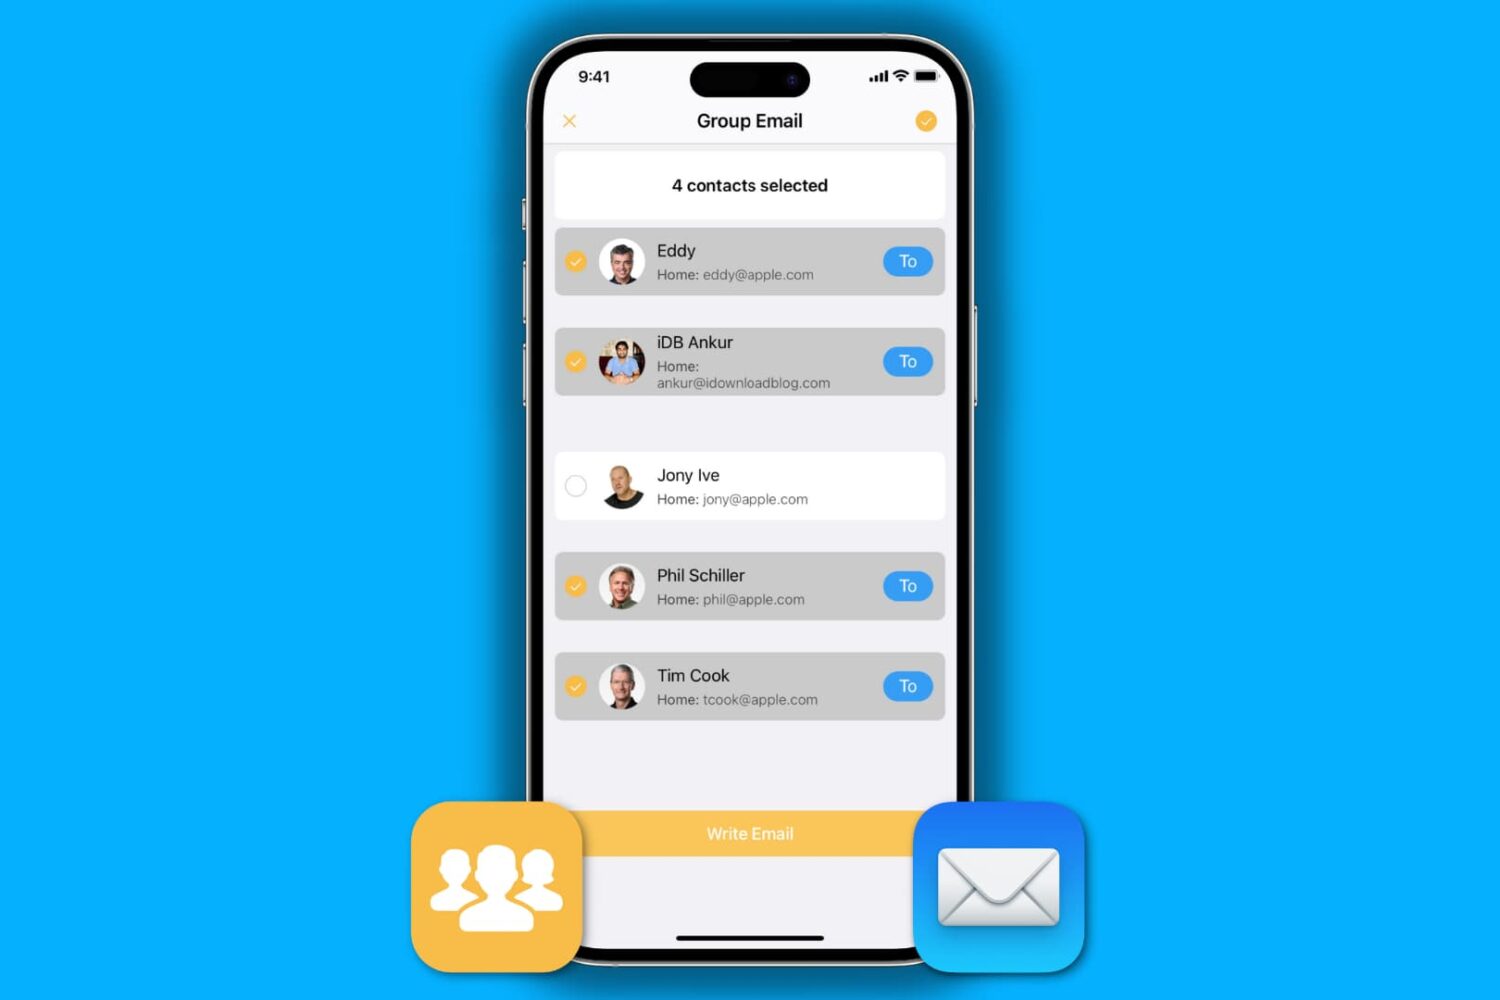 Send group email from iPhone